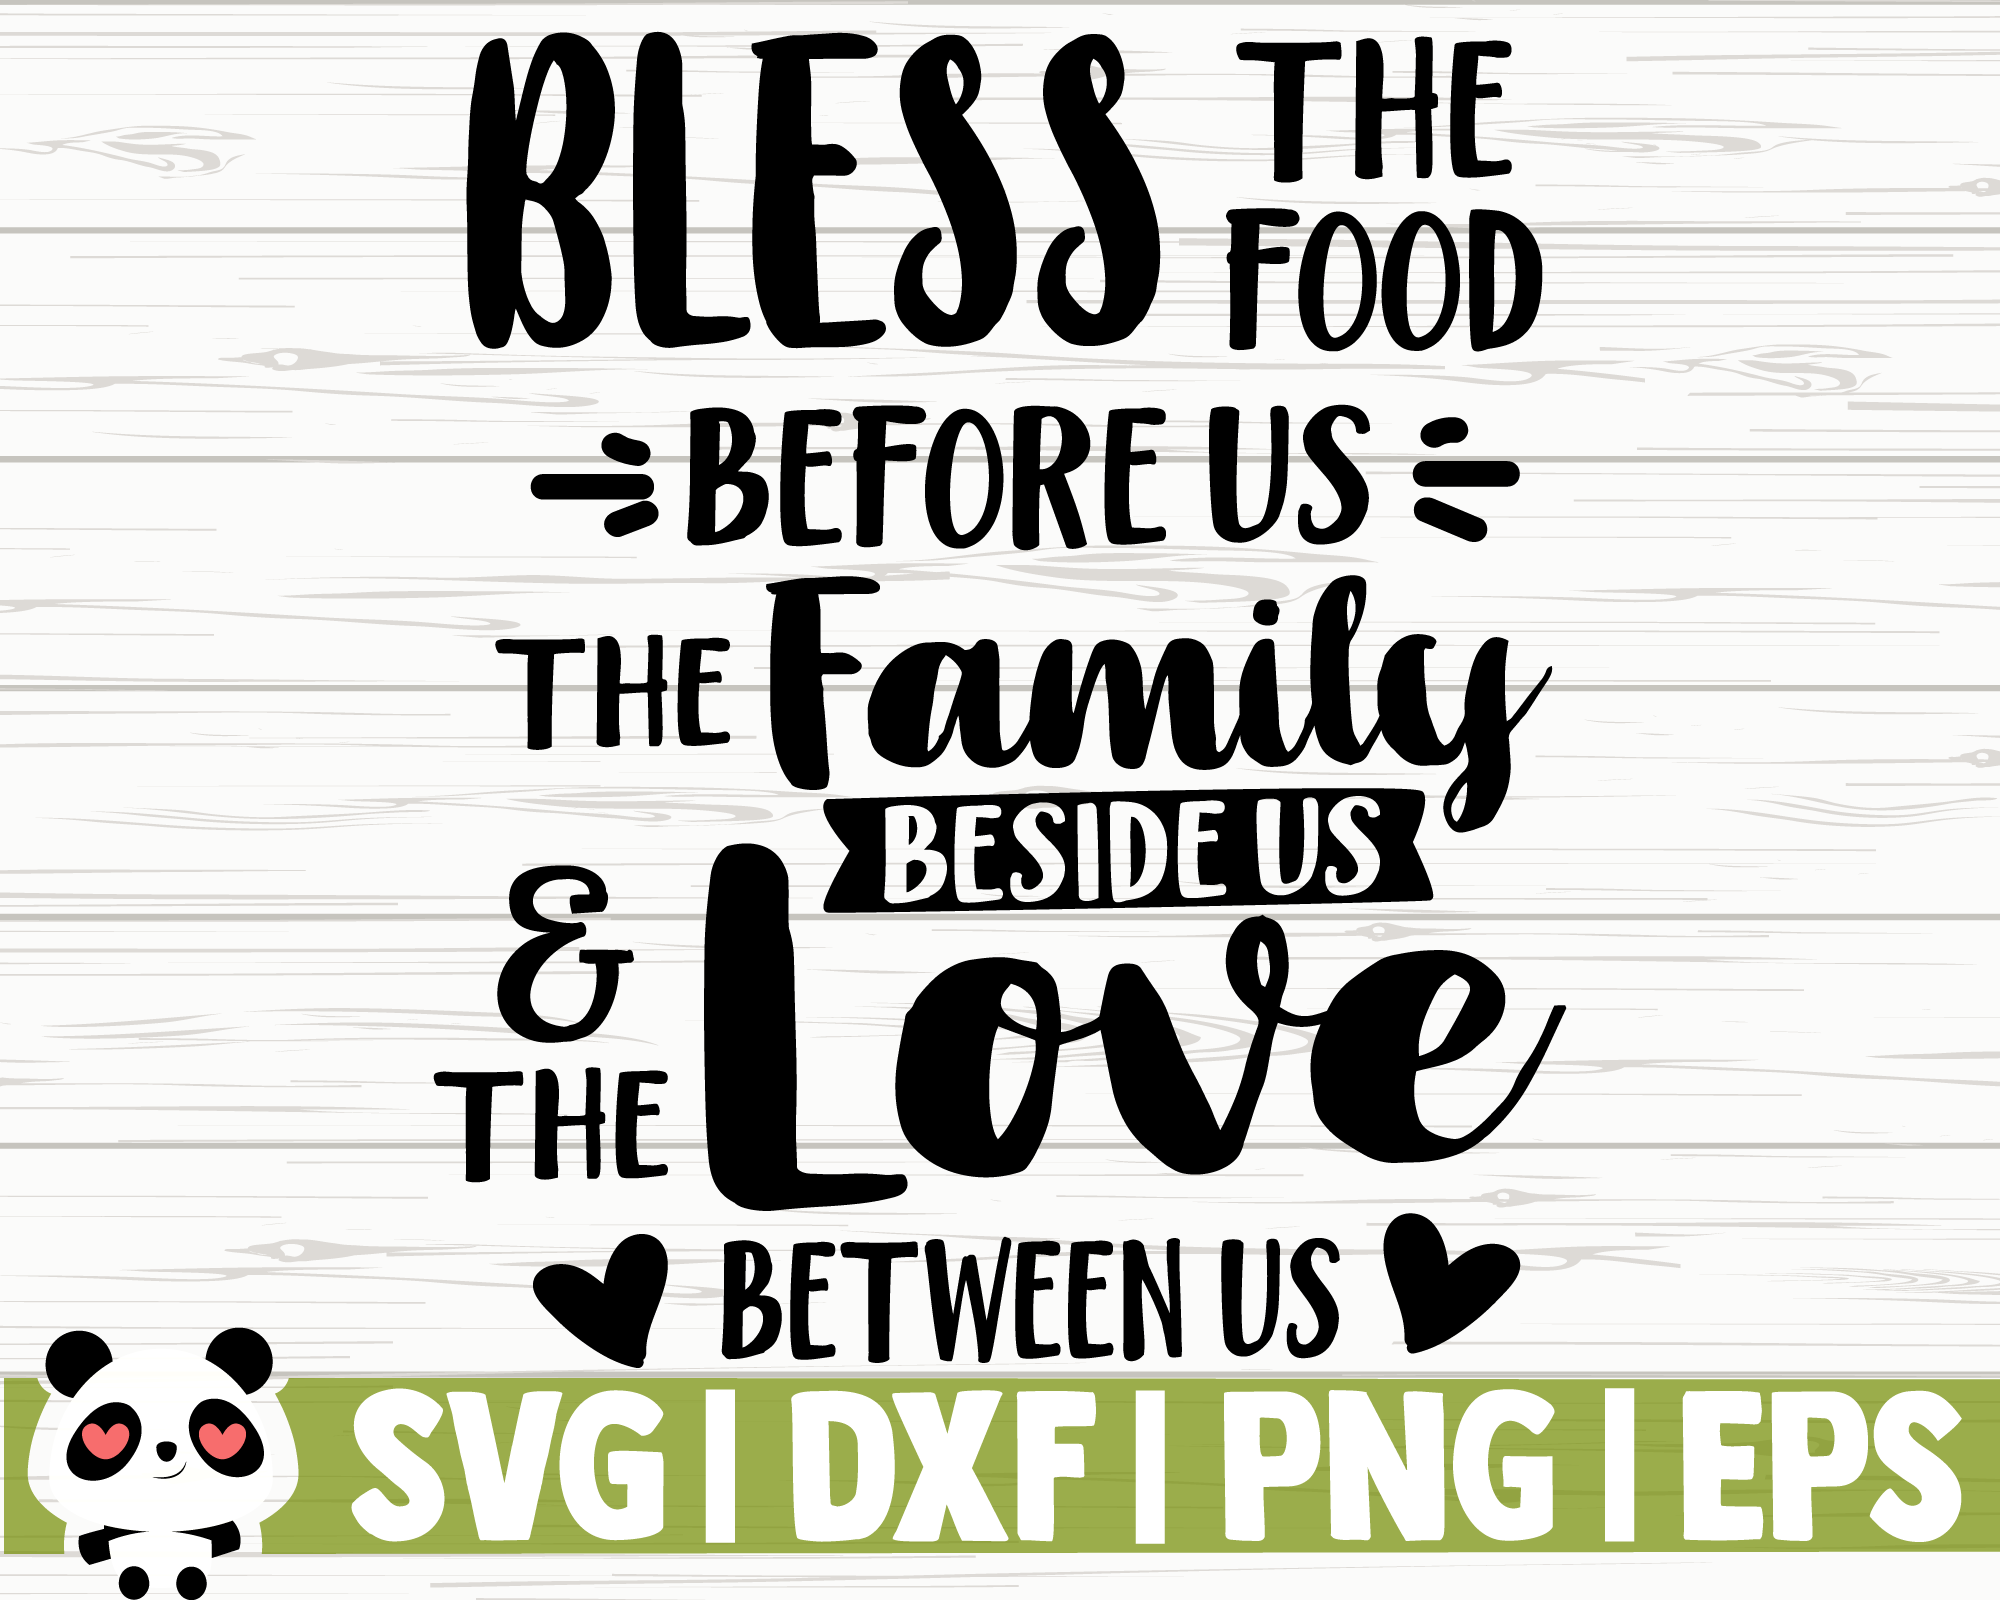 Bless The Food Before Us The Family Beside Us And The Love Between Us By CreativeDesignsLLC 